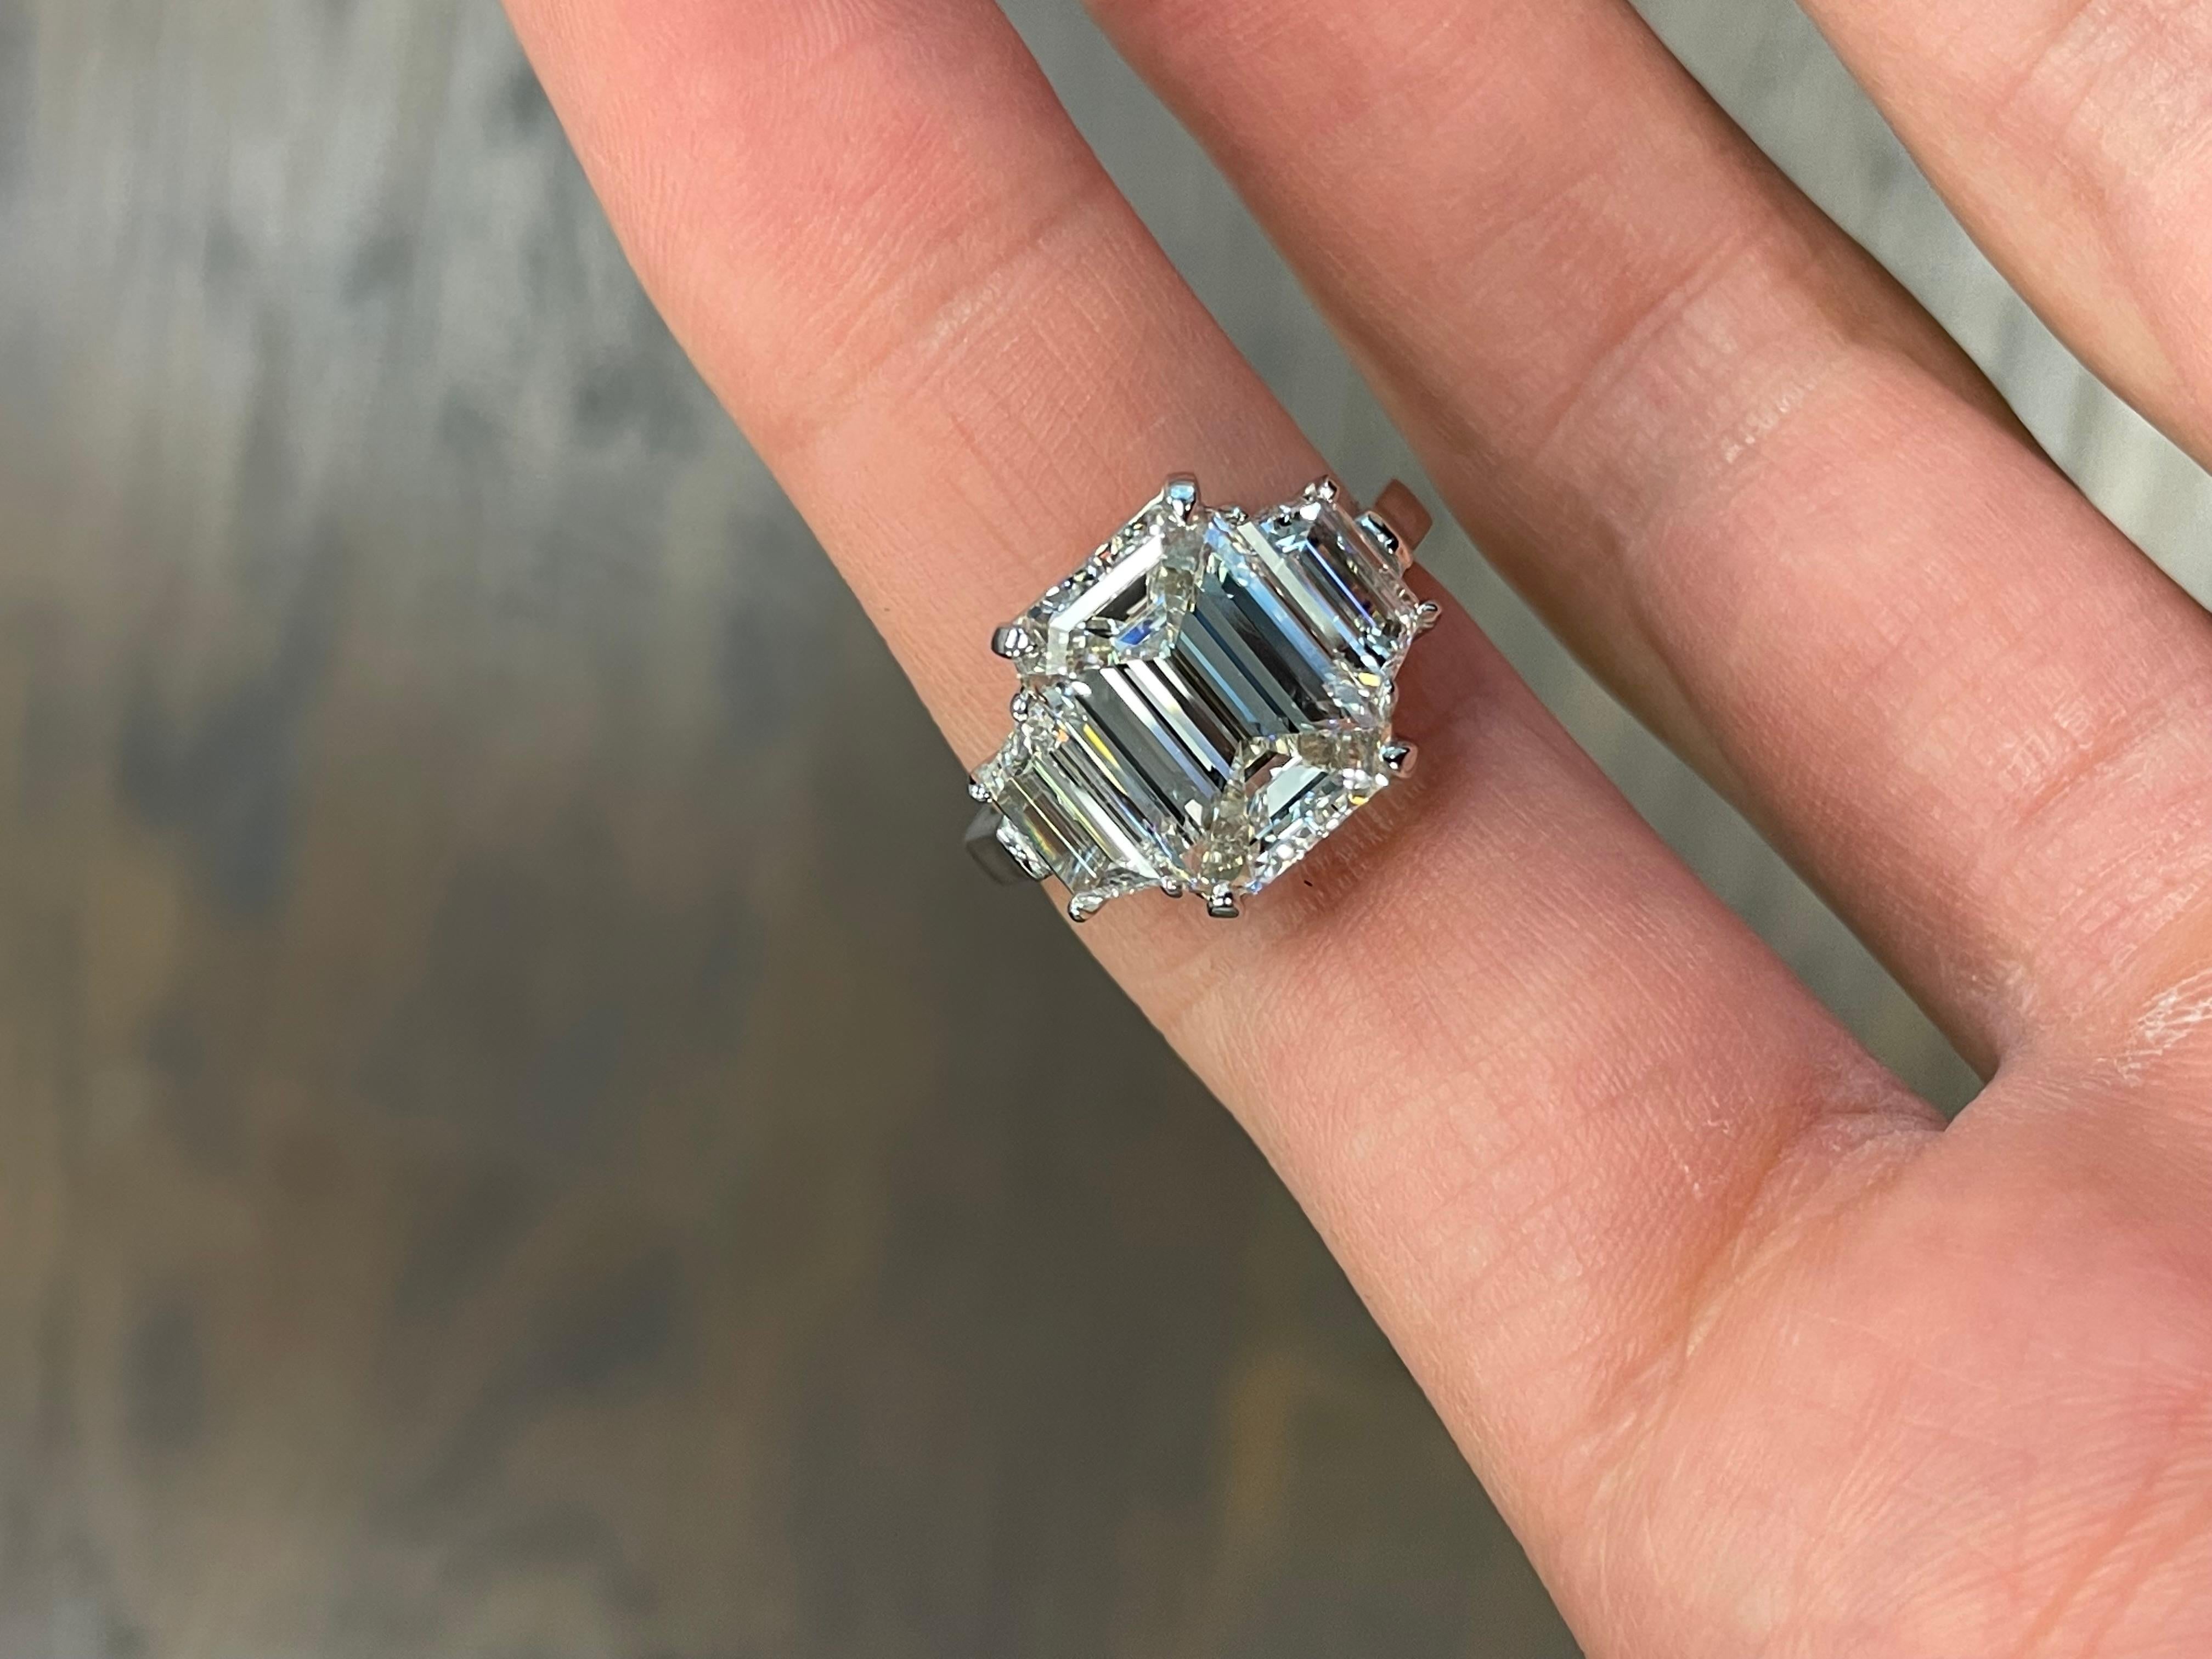 Extraordinary 5.01 Carat Emerald Cut Engagement Ring 

Setting:
Platinum

Center Stone: GIA Certified 5.01 Carat Emerald Cut
Carat Weight: 5.01
Clarity: VS2
Color: H
Measurements: 11.89 x 8.43 x 5.51 mm
GIA # 2225080882

Side Stones: Trapezoid Cut